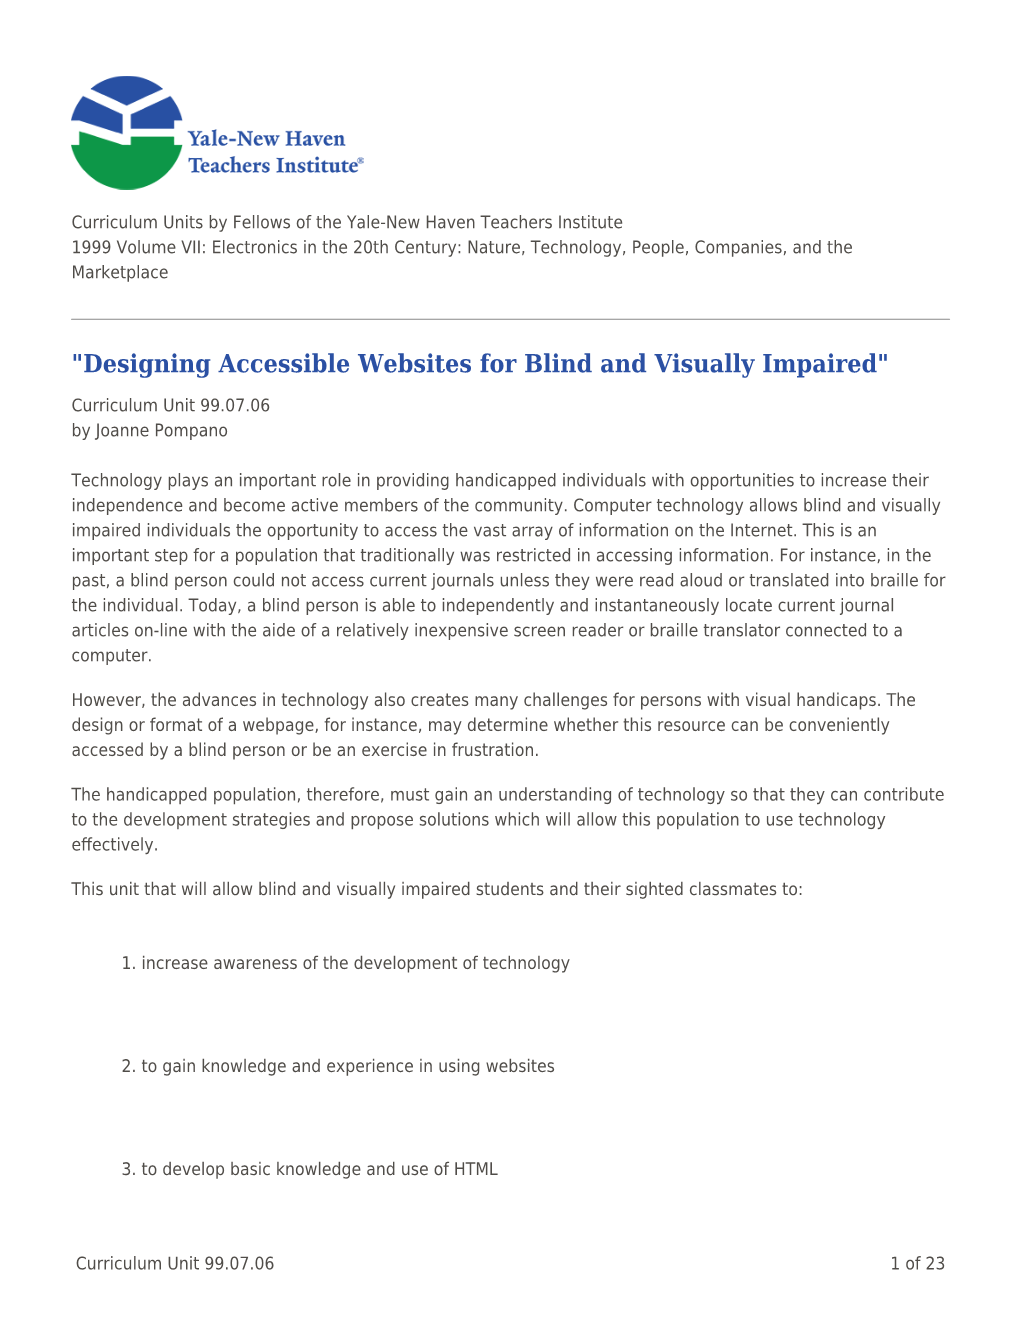 "Designing Accessible Websites for Blind and Visually Impaired"